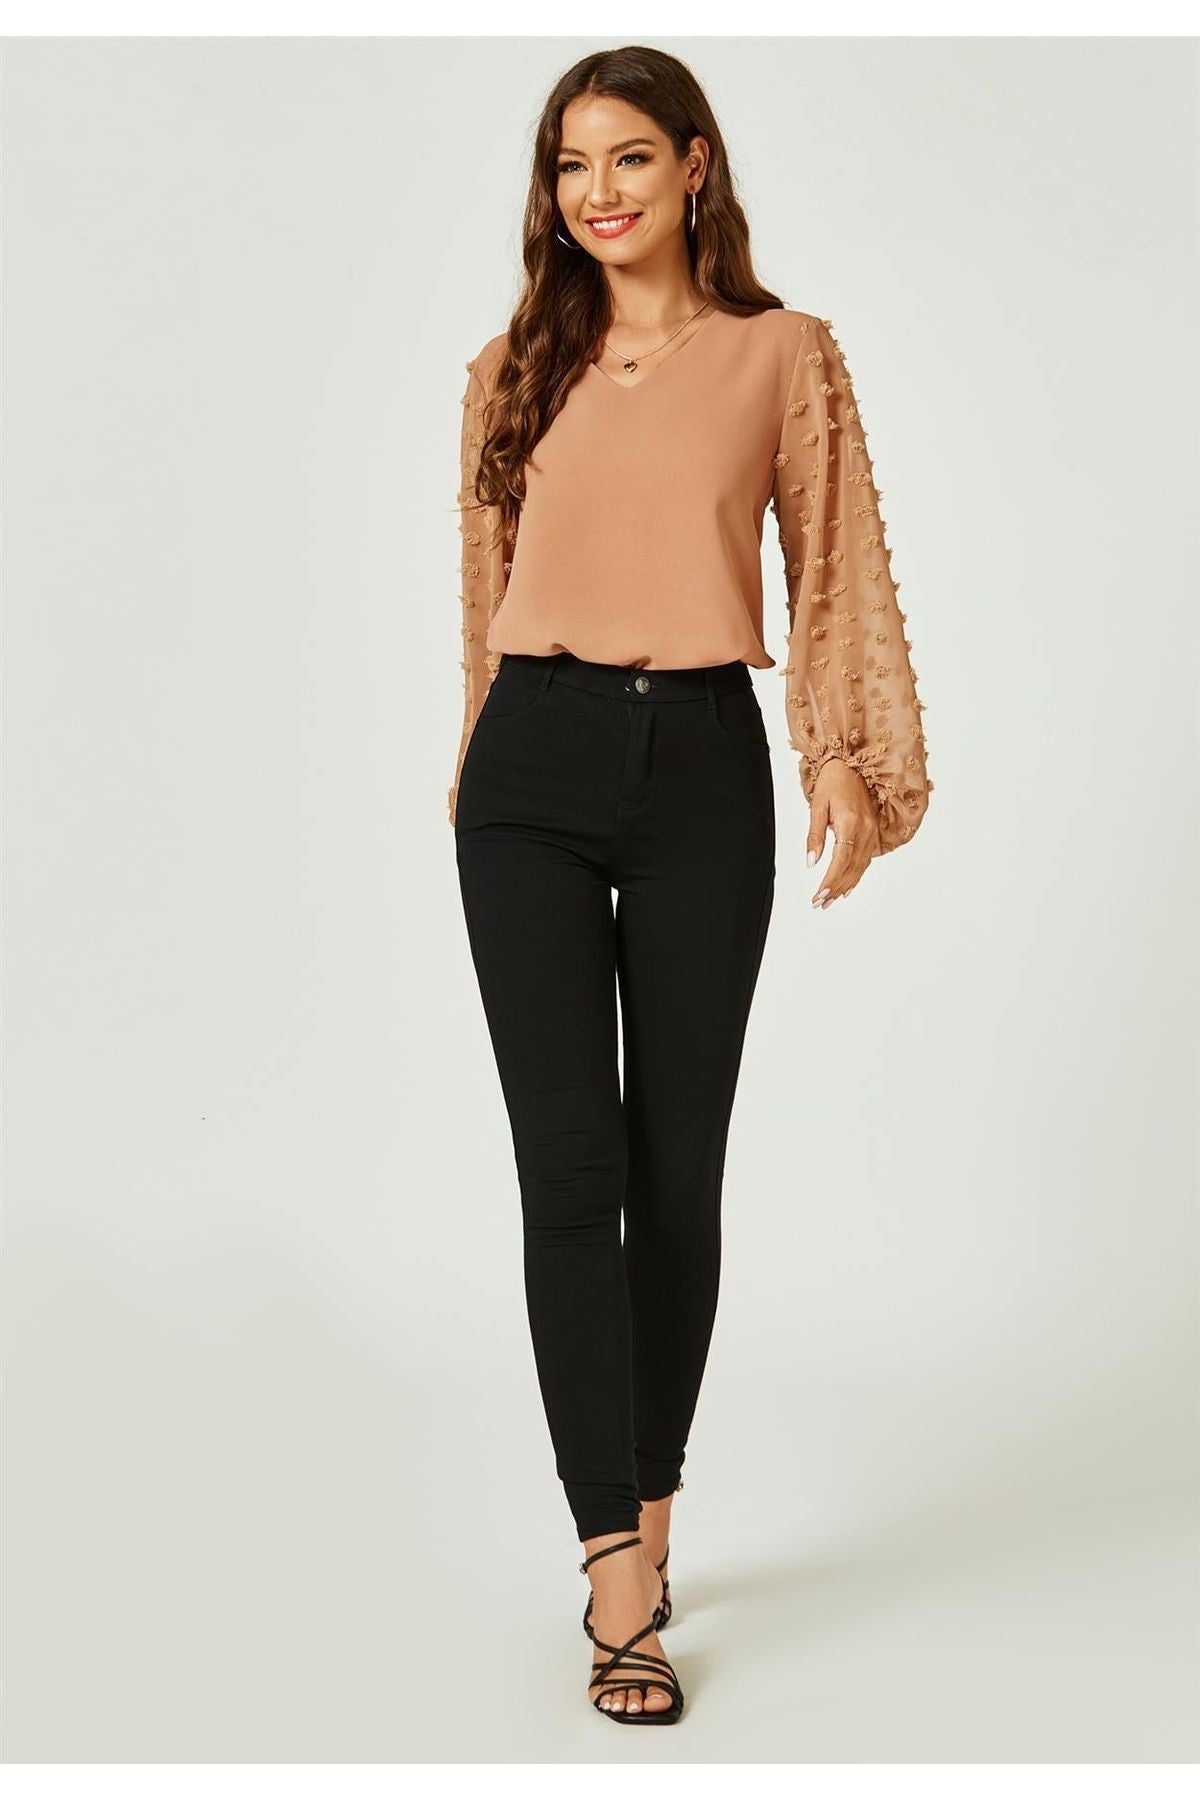 Lace Long Sleeve V Neck Top Blouse In Camel FS502